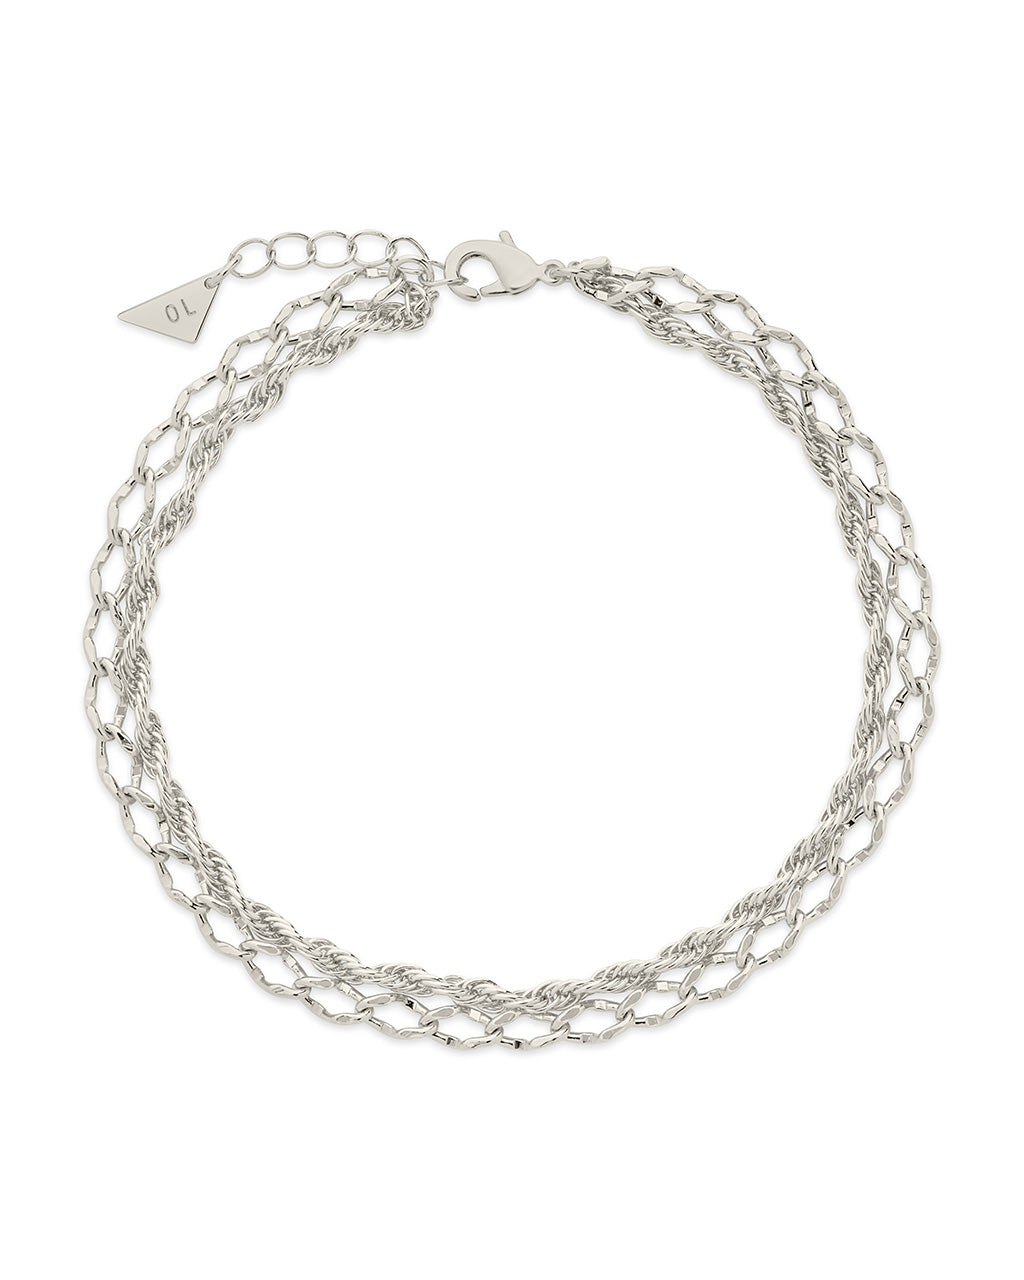 Tessa Layered Chain Anklet Anklet Sterling Forever Silver 